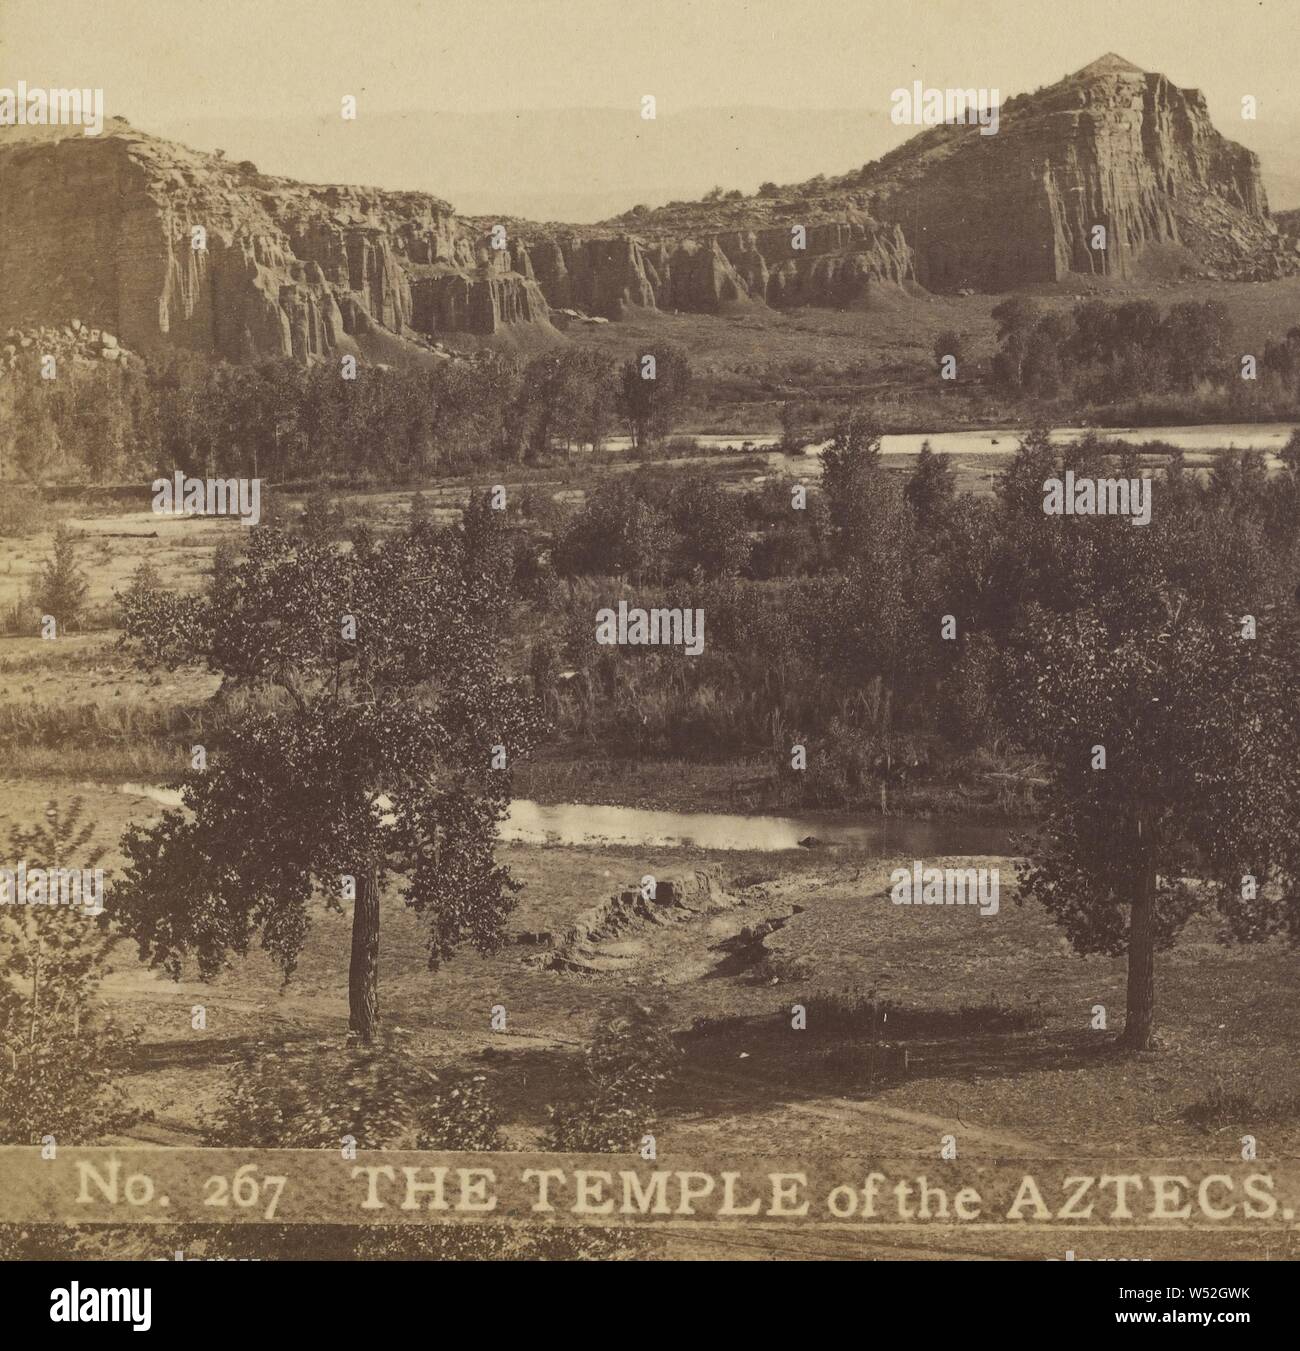 The Temple of the Aztecs., Charles Weitfle (American, 1836 - after 1884), about 1880, Albumen silver print Stock Photo